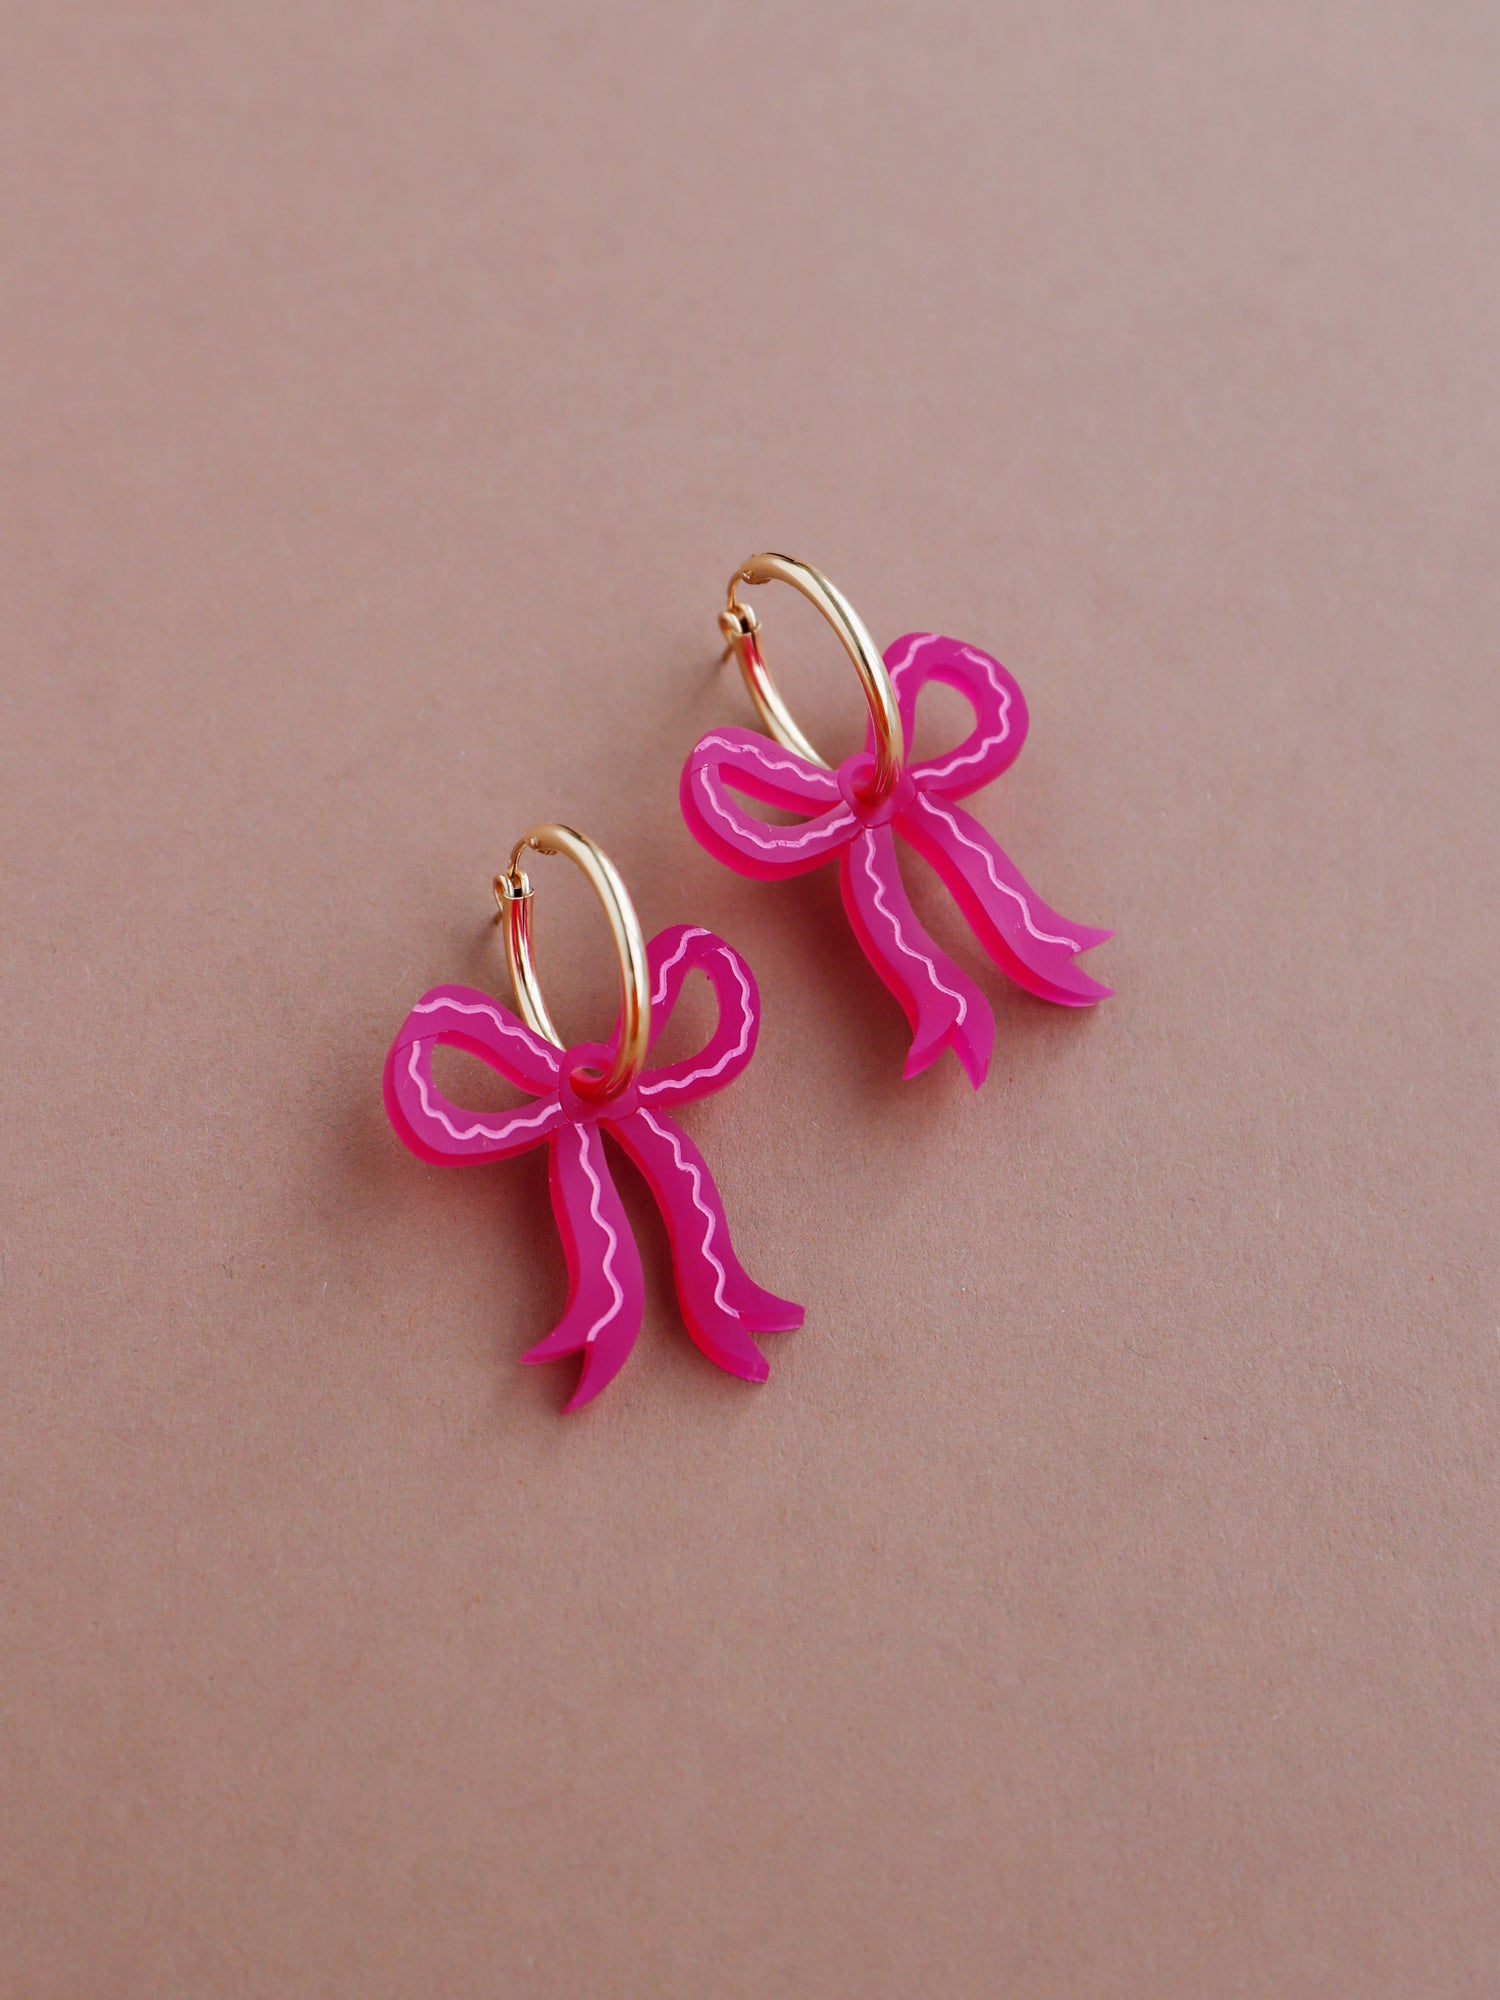 Romantic mini bow earrings in a recycled pink made from velvety marbled acrylic with hand-inked details. Surprisingly lightweight so can be worn for extended periods of time. Each bow is hand-sculpted into a 3D form giving it a lovely realistic ribbon-like effect. This also adds a unique charm to each one. Handmade by Wolf & Moon in the UK. ⁠